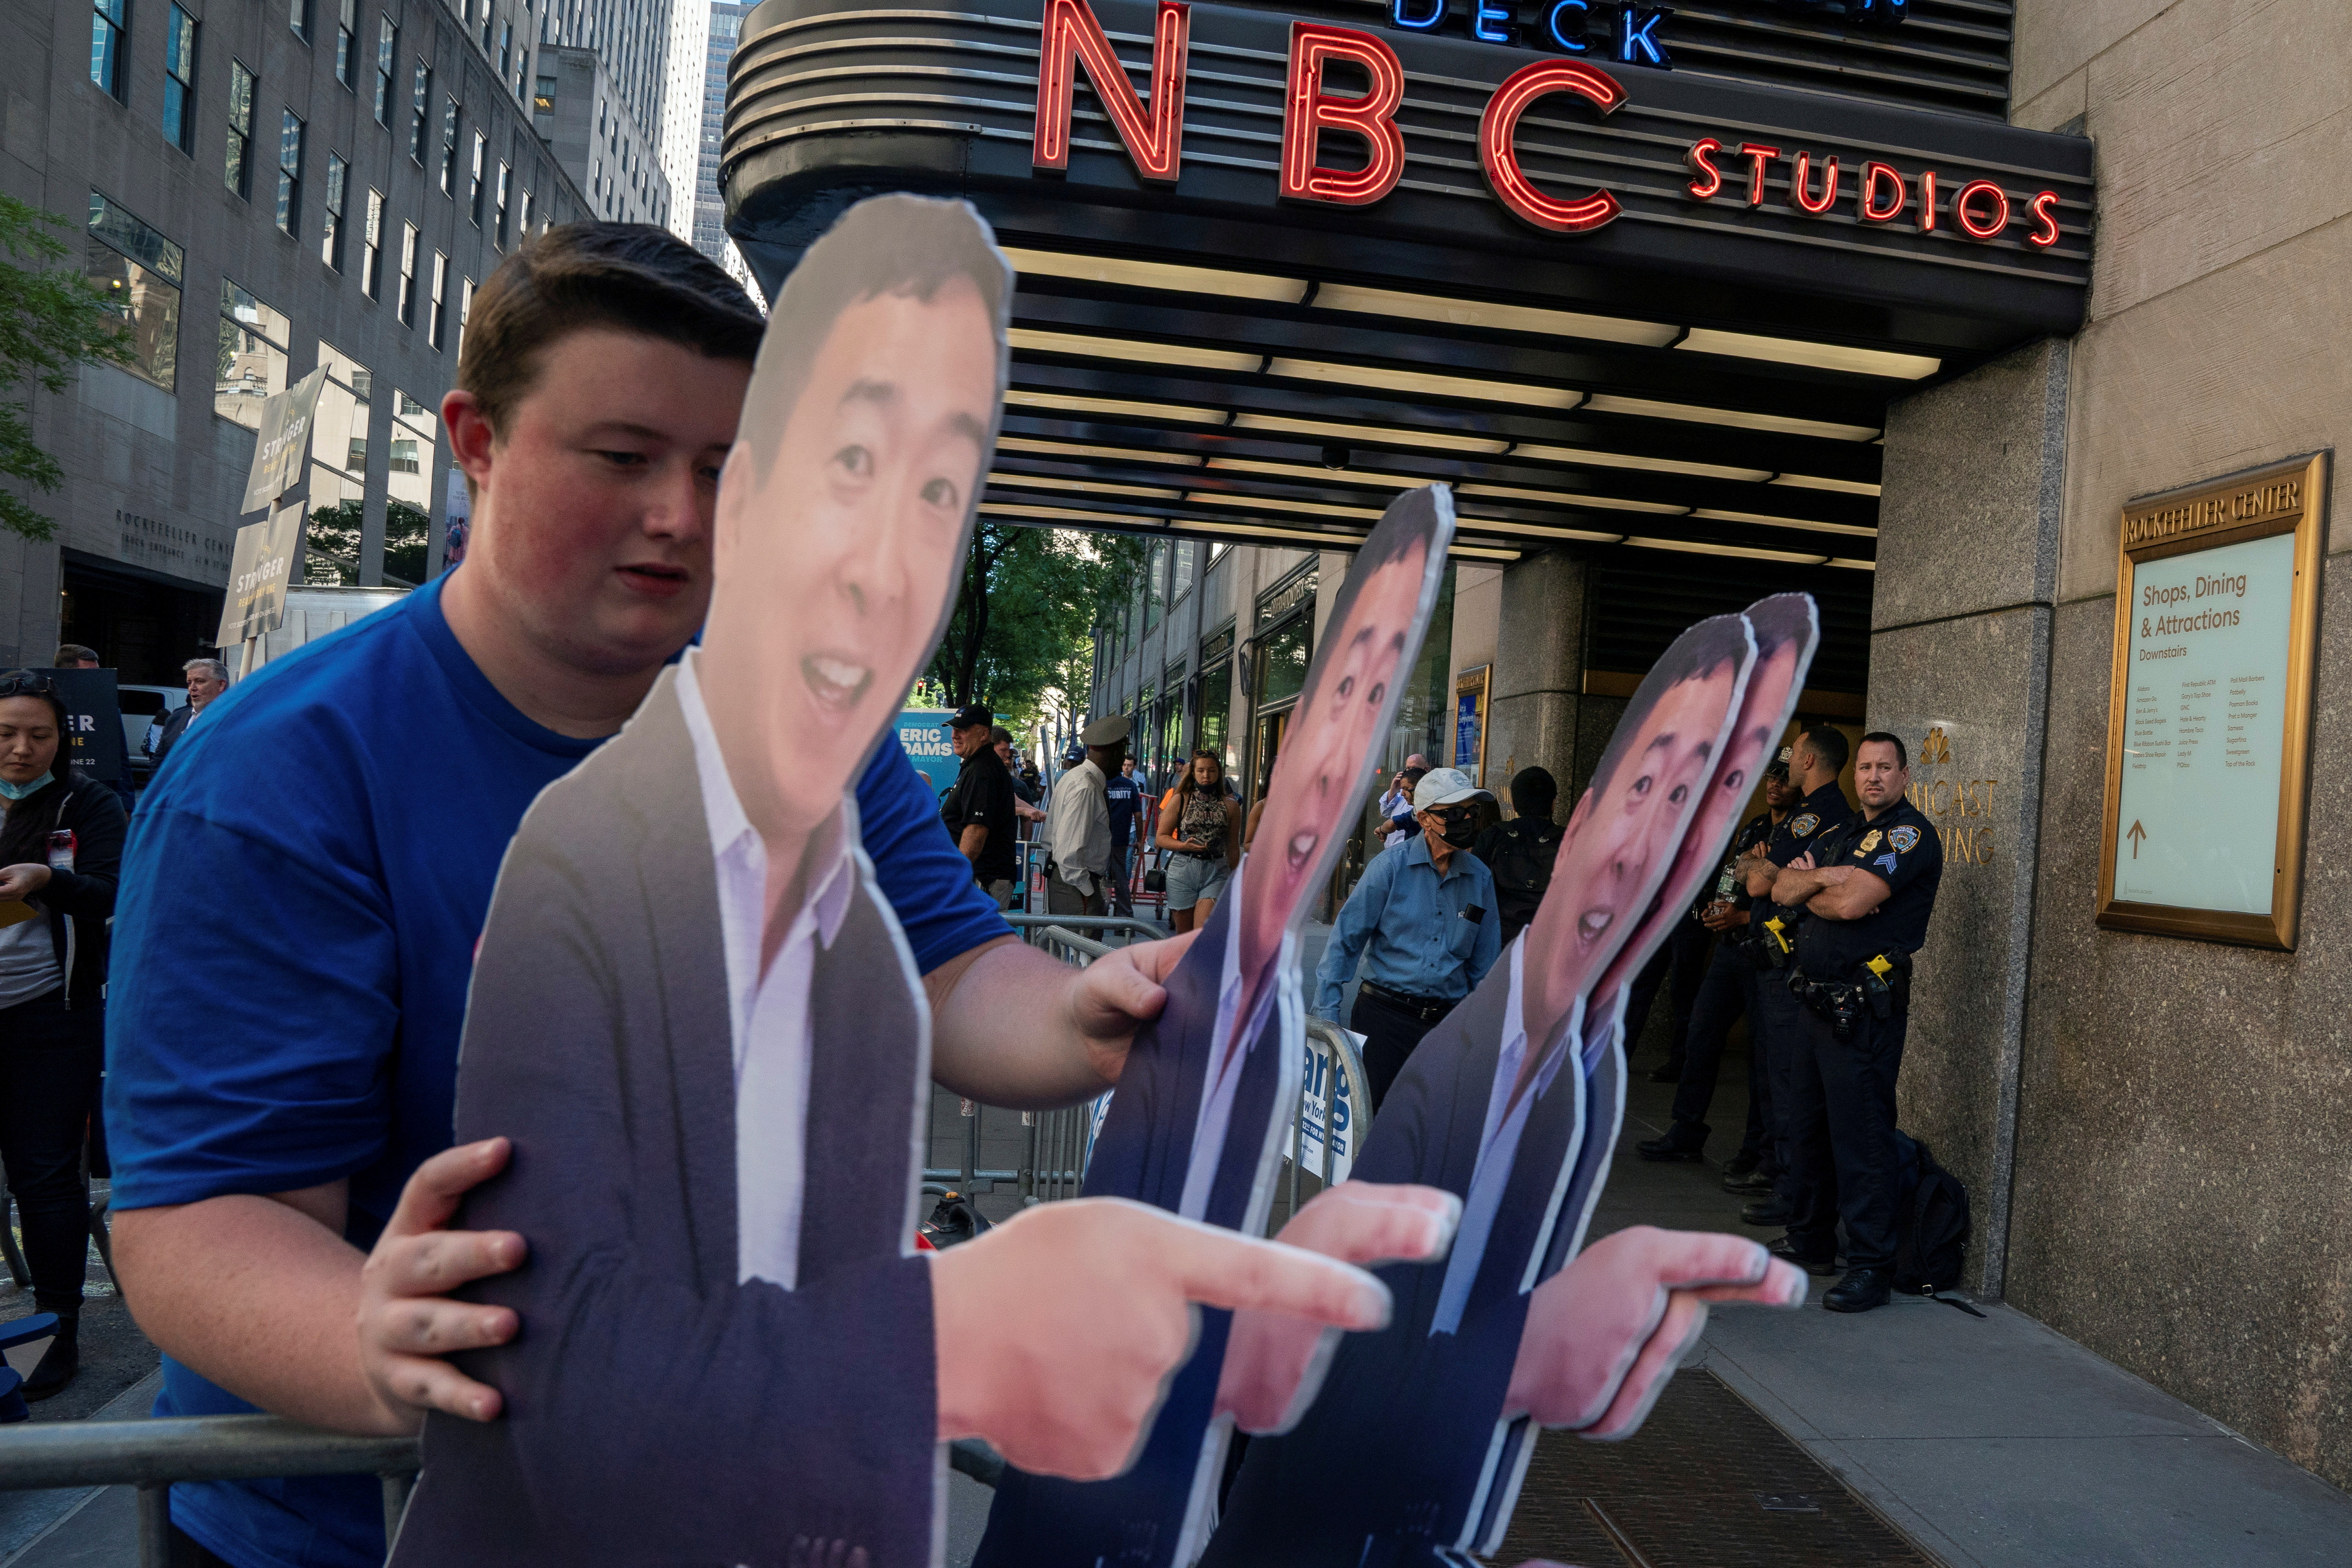 A supporter carries life size cutouts of New York City Mayoral hopeful Andrew Yang at the Democratic primary debate in New York City